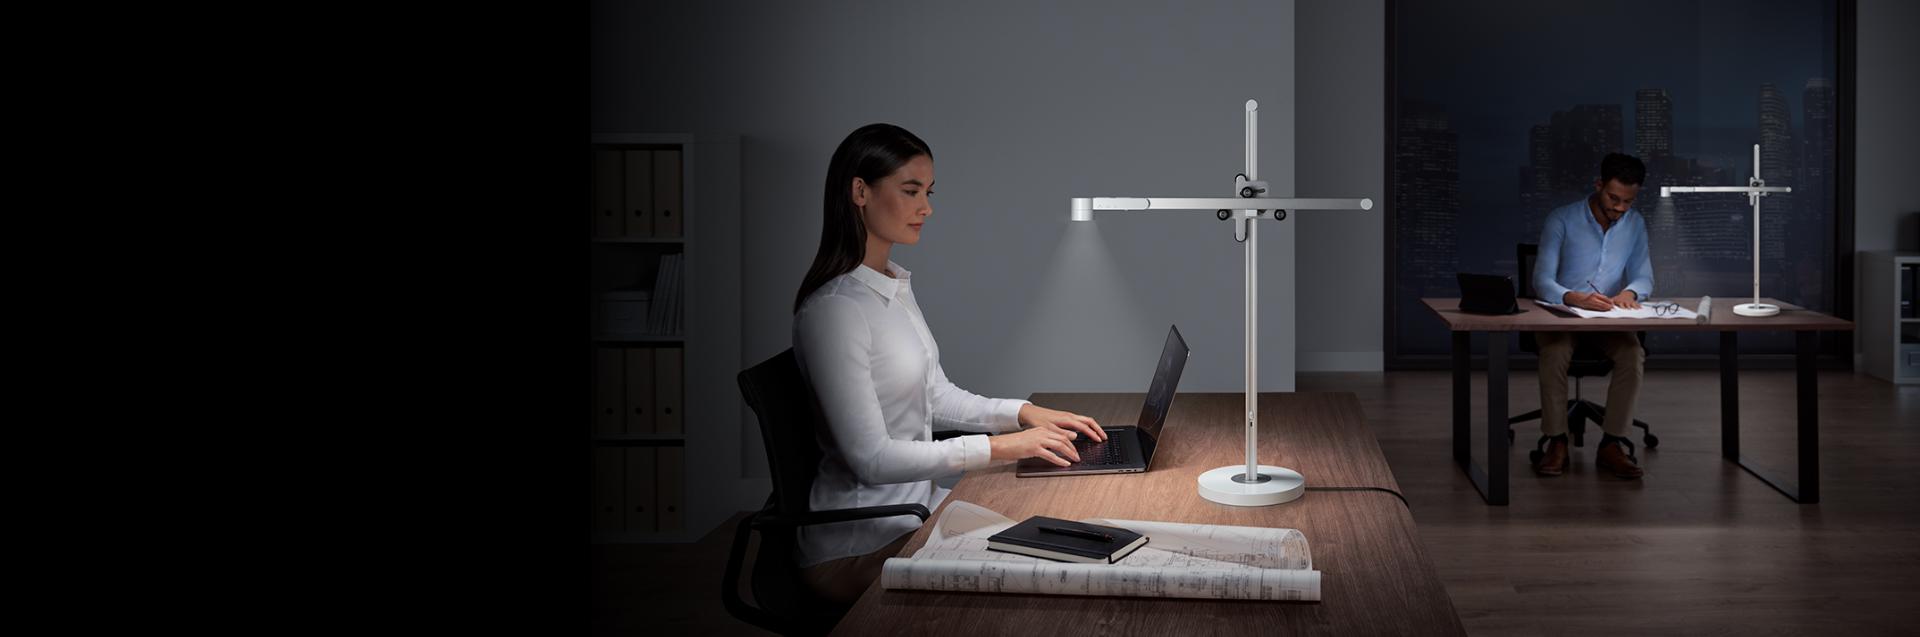 2 models using Dyson Lightcycle desk to work